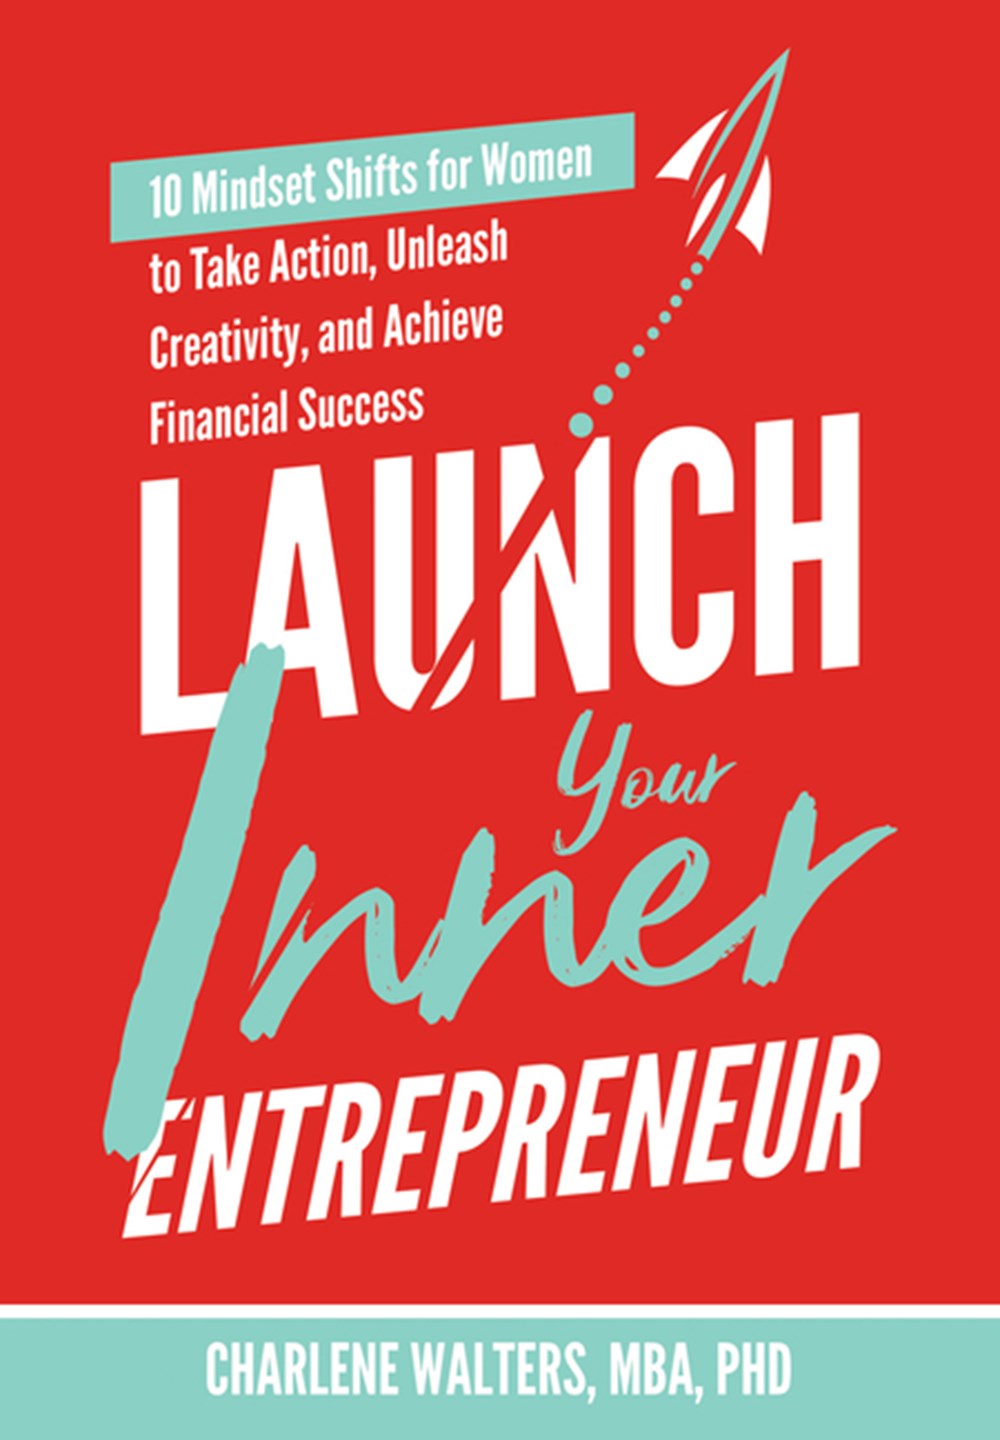 Launch Your Inner Entrepreneur 10 Mindset Shifts for Women to Take Action, Unleash Creativity, and A